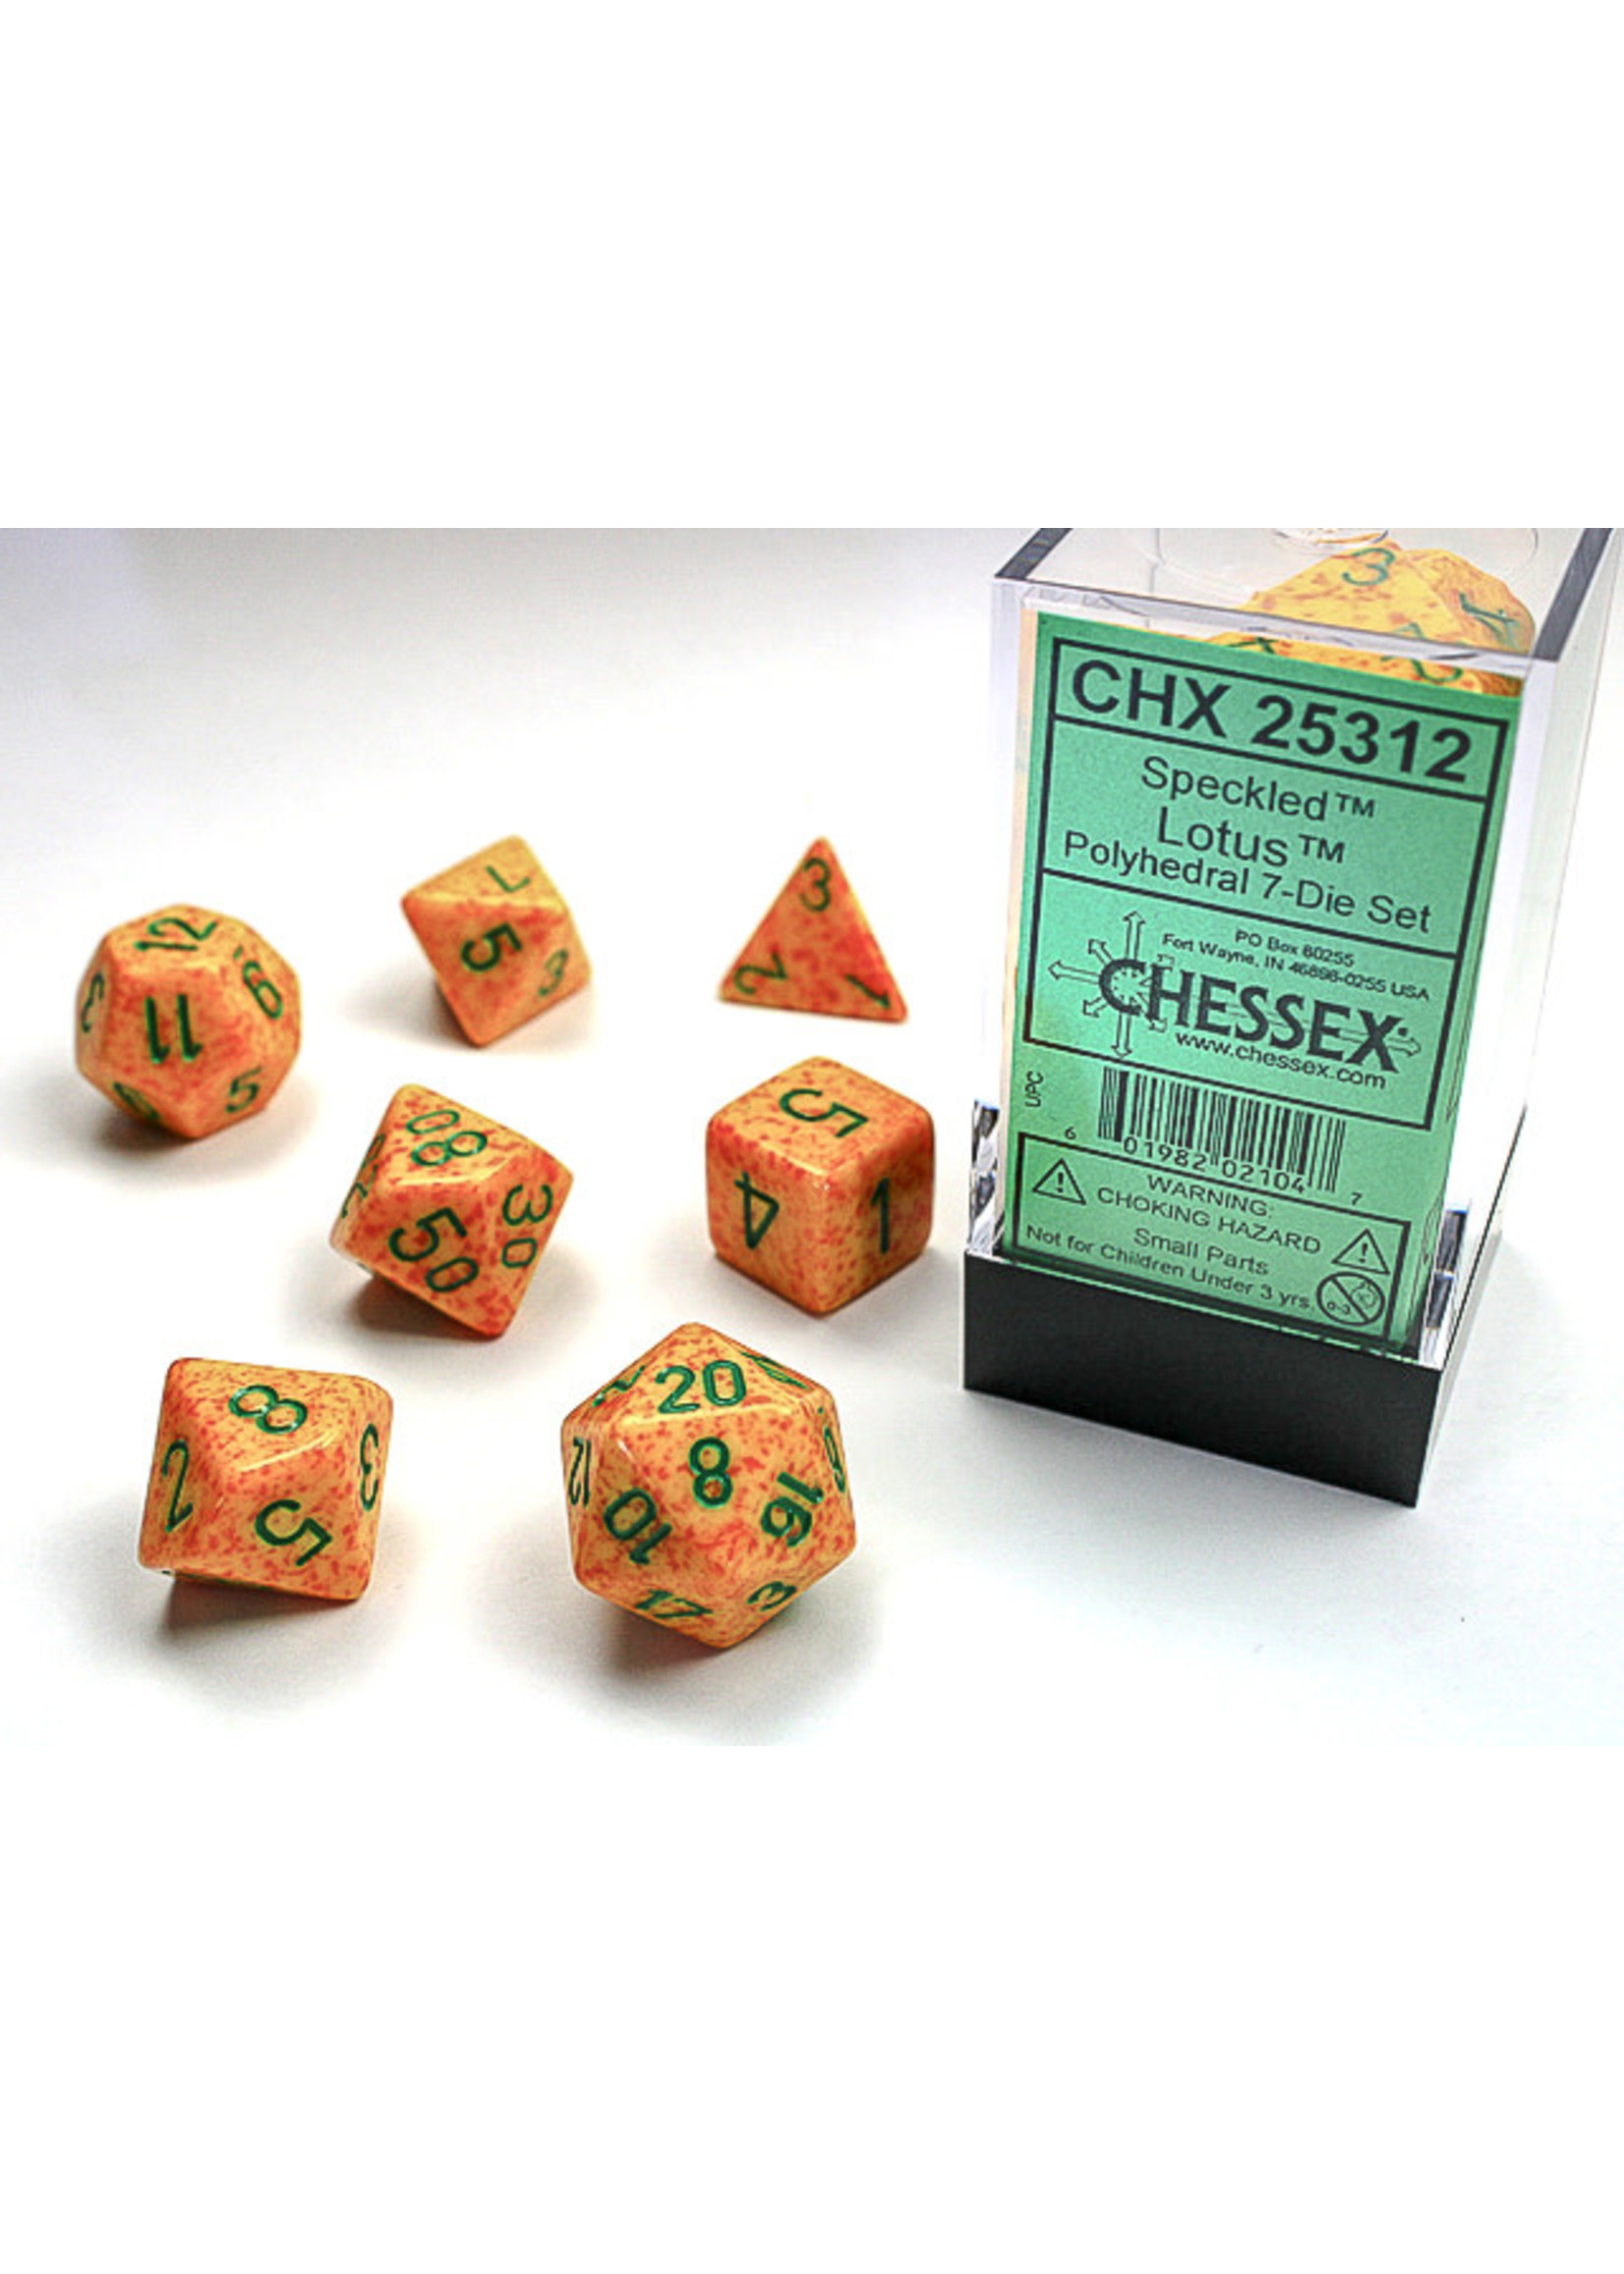 Chessex Chessex "Speckled" Dice Sets